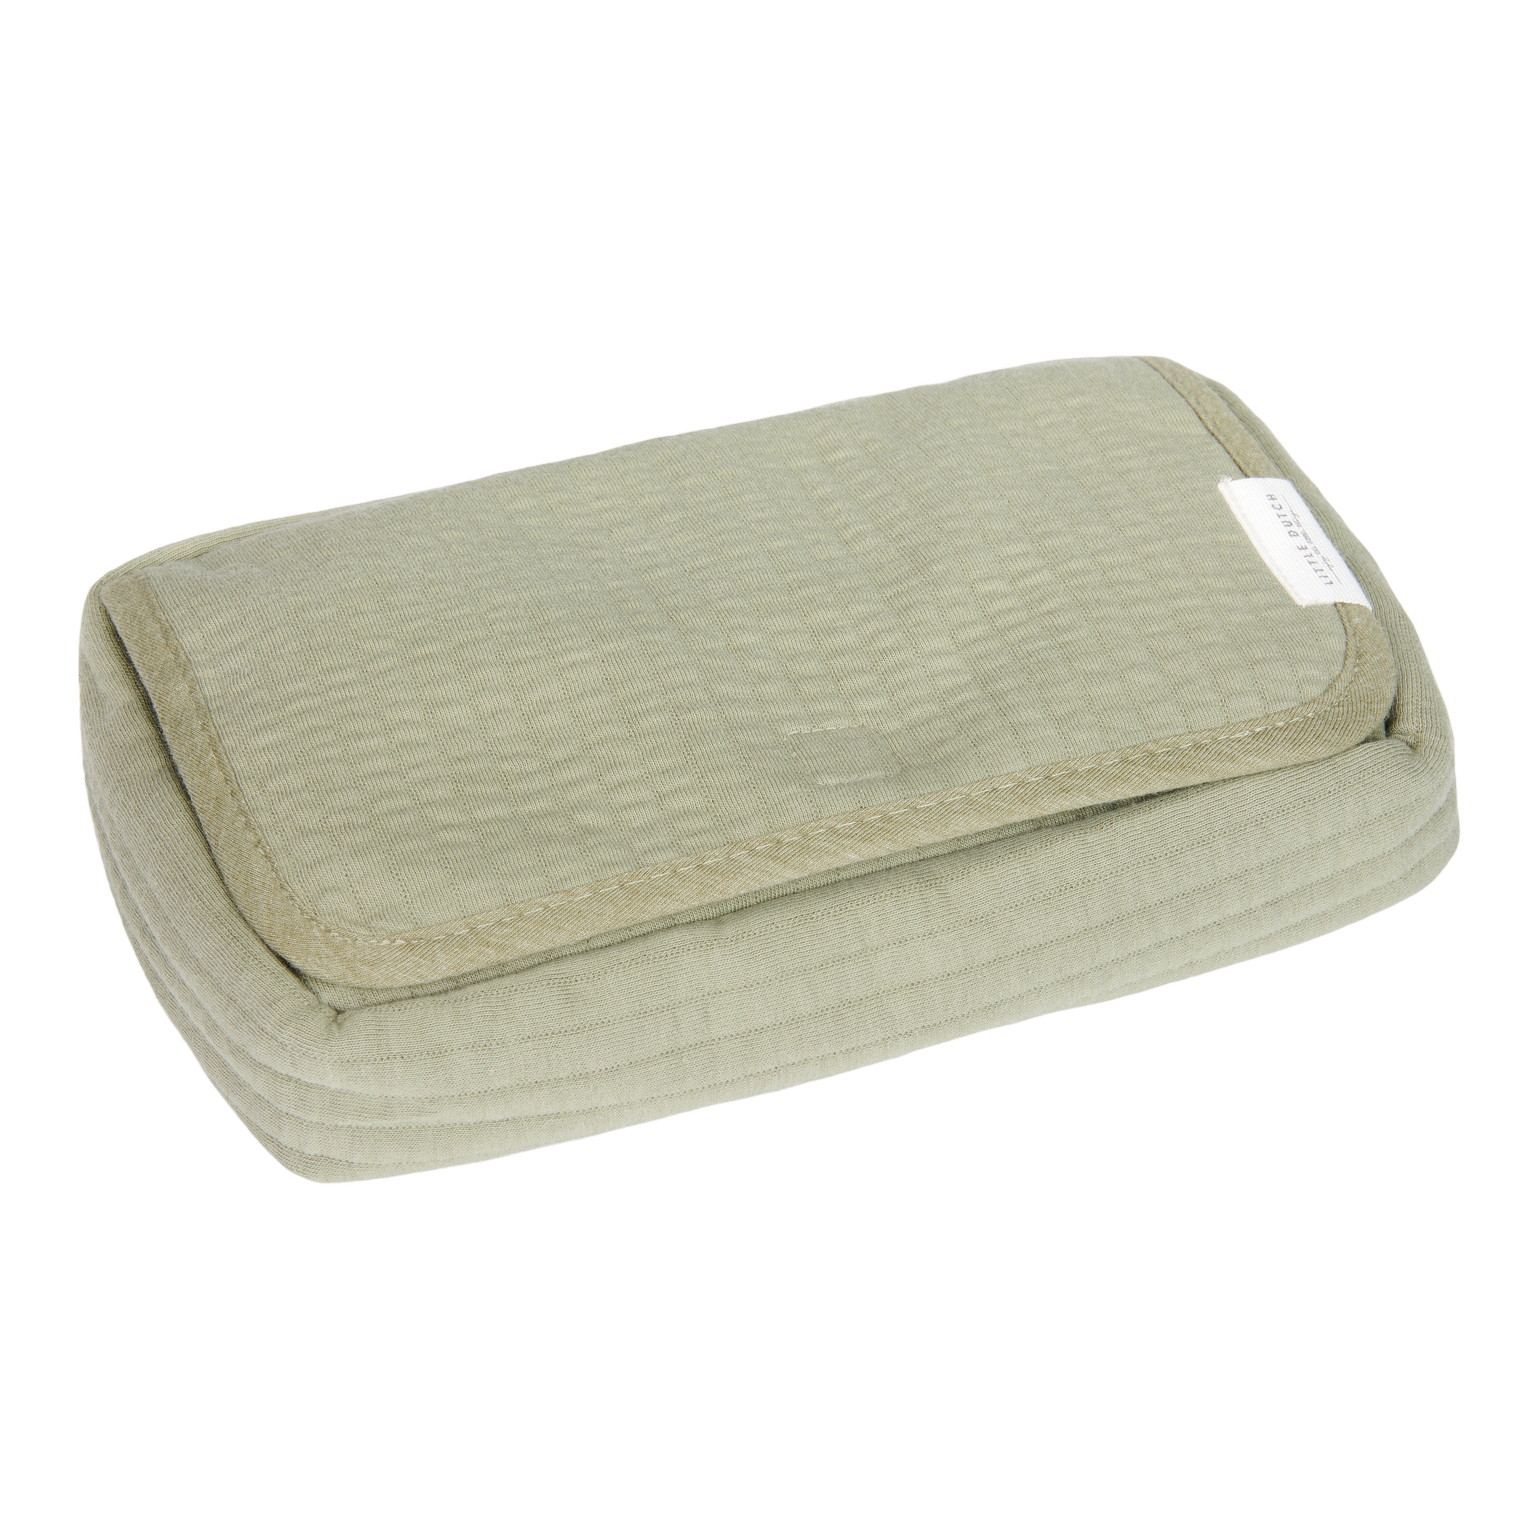 TE30714008 - Baby wipes cover Pure Olive - Little Farm (1)